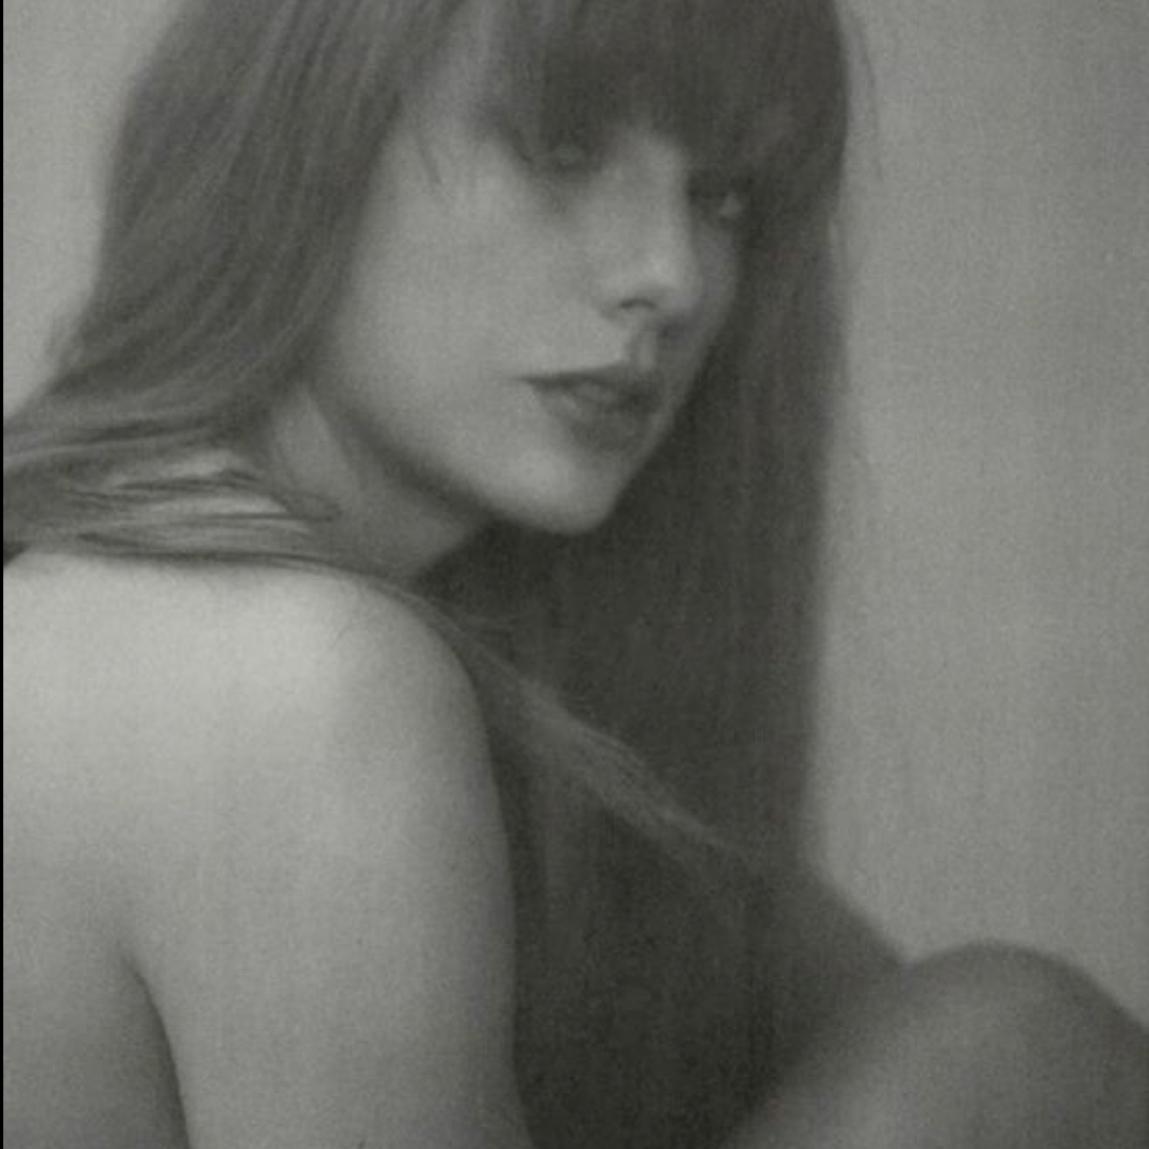 Taylorswift 's images